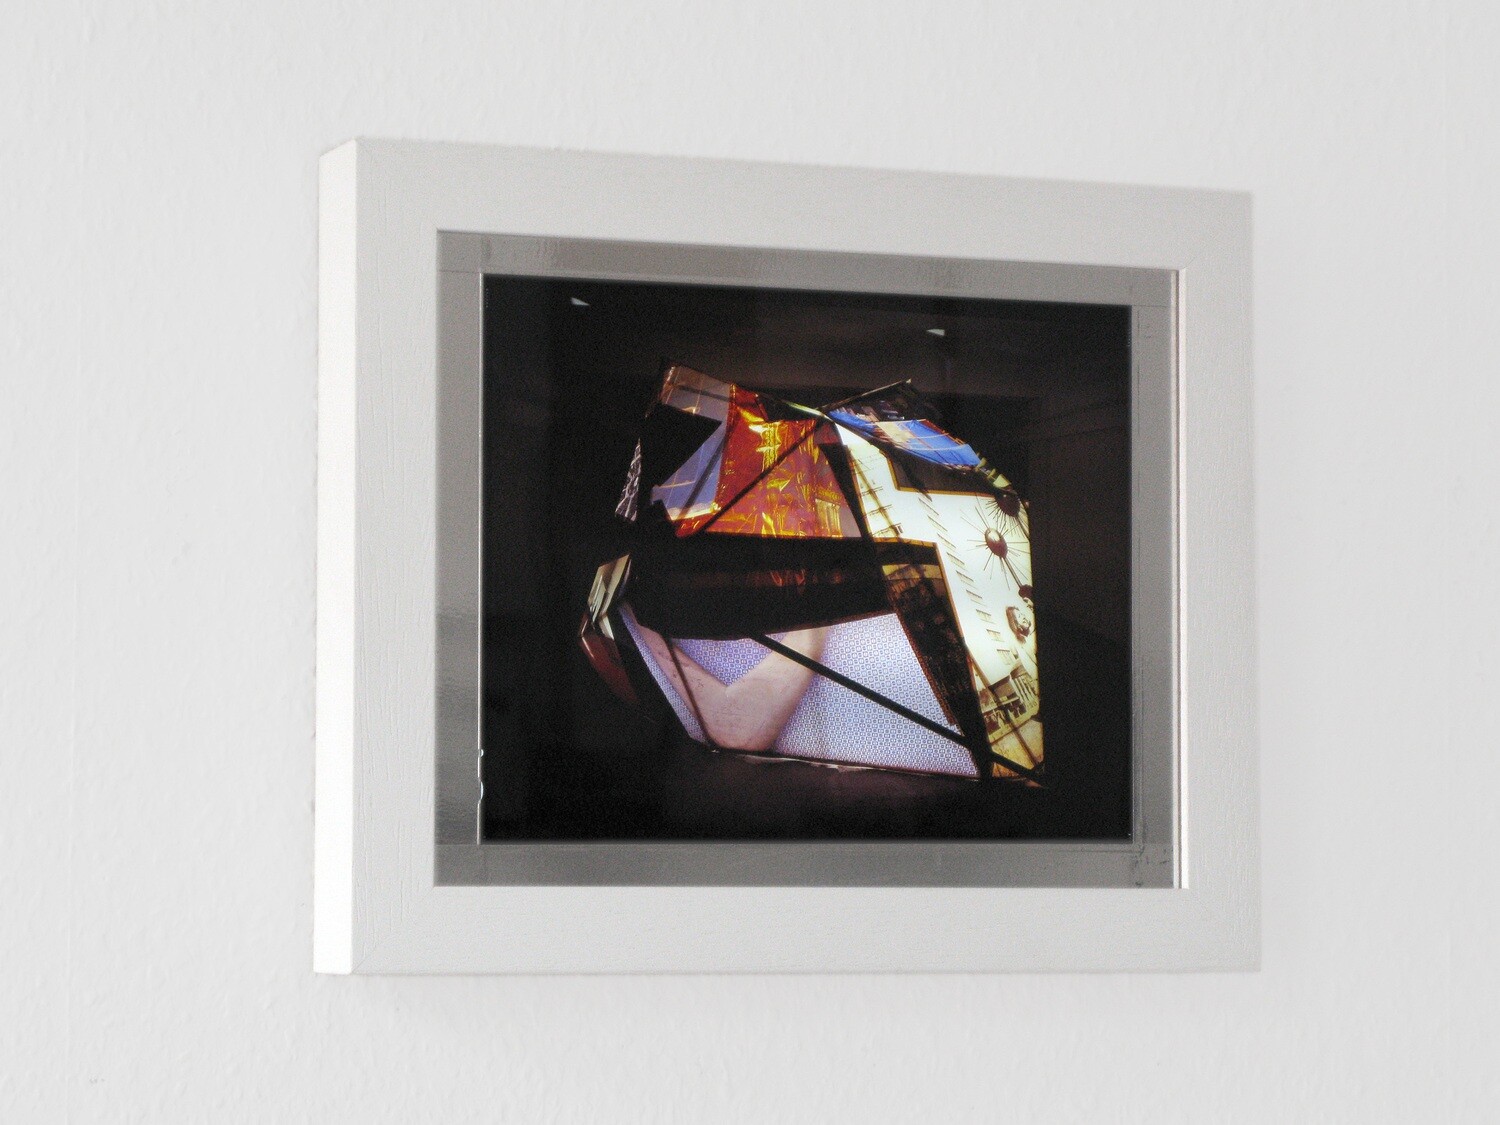 Polygon, SIGNED+NUMBERED, 2010, Edition Nr. 5 of 5, free shipping